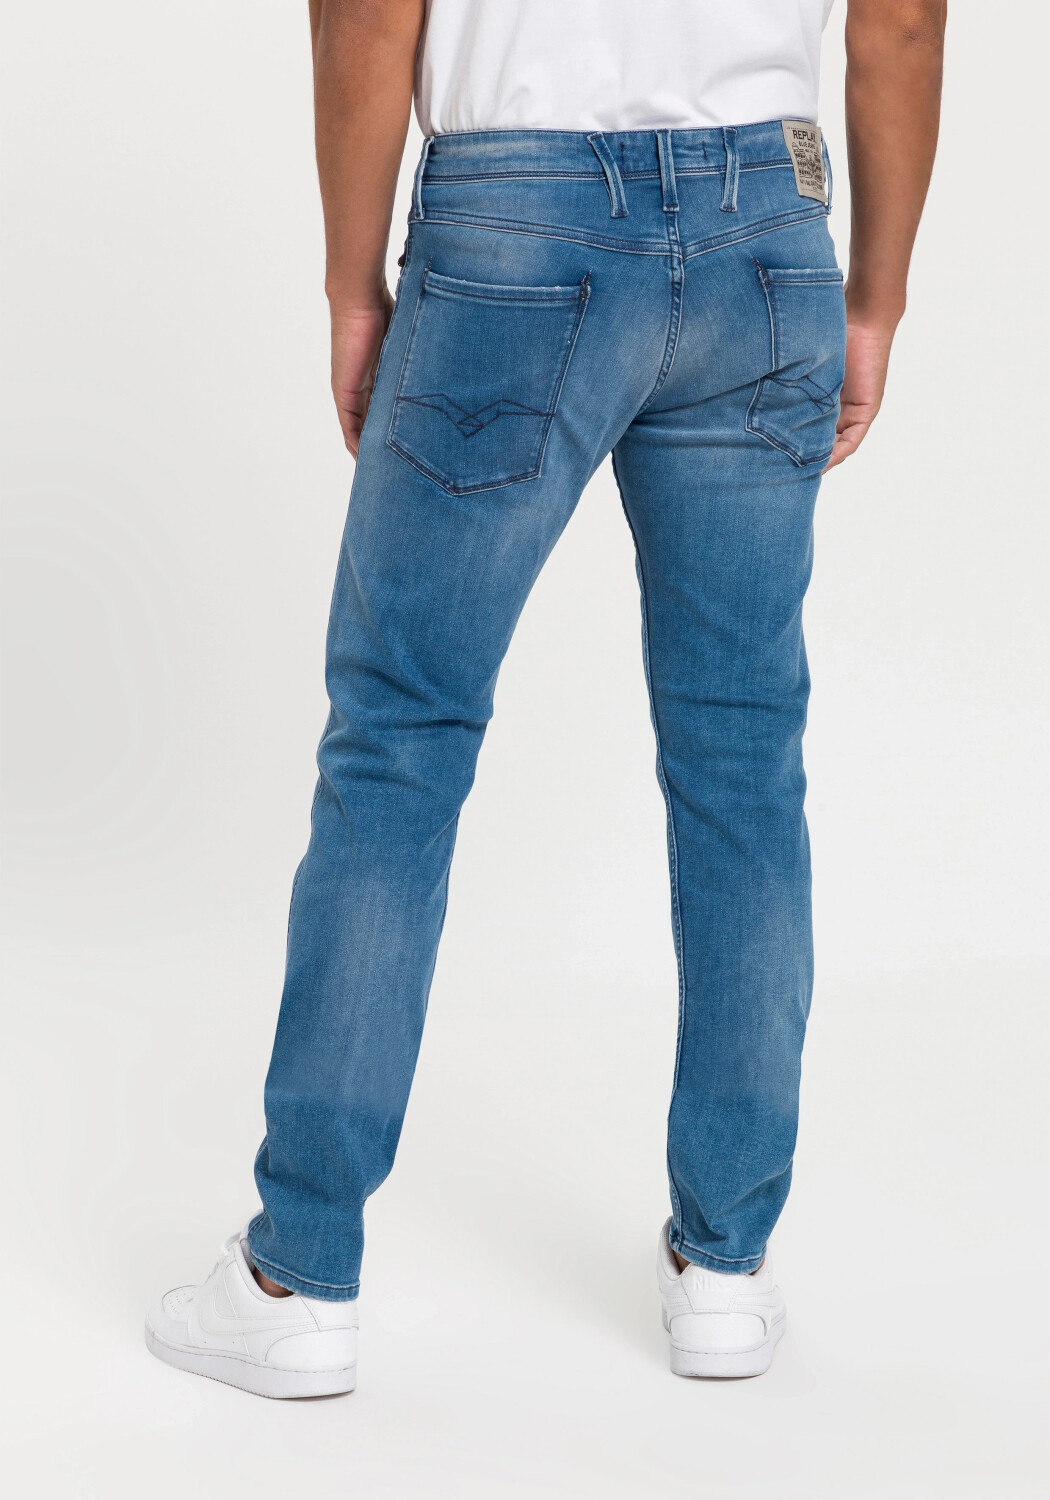 – Hyperflex on Deals light Jeans Slim (BF5) (Today) £48.27 from Fit Replay Best blue Anbass Buy